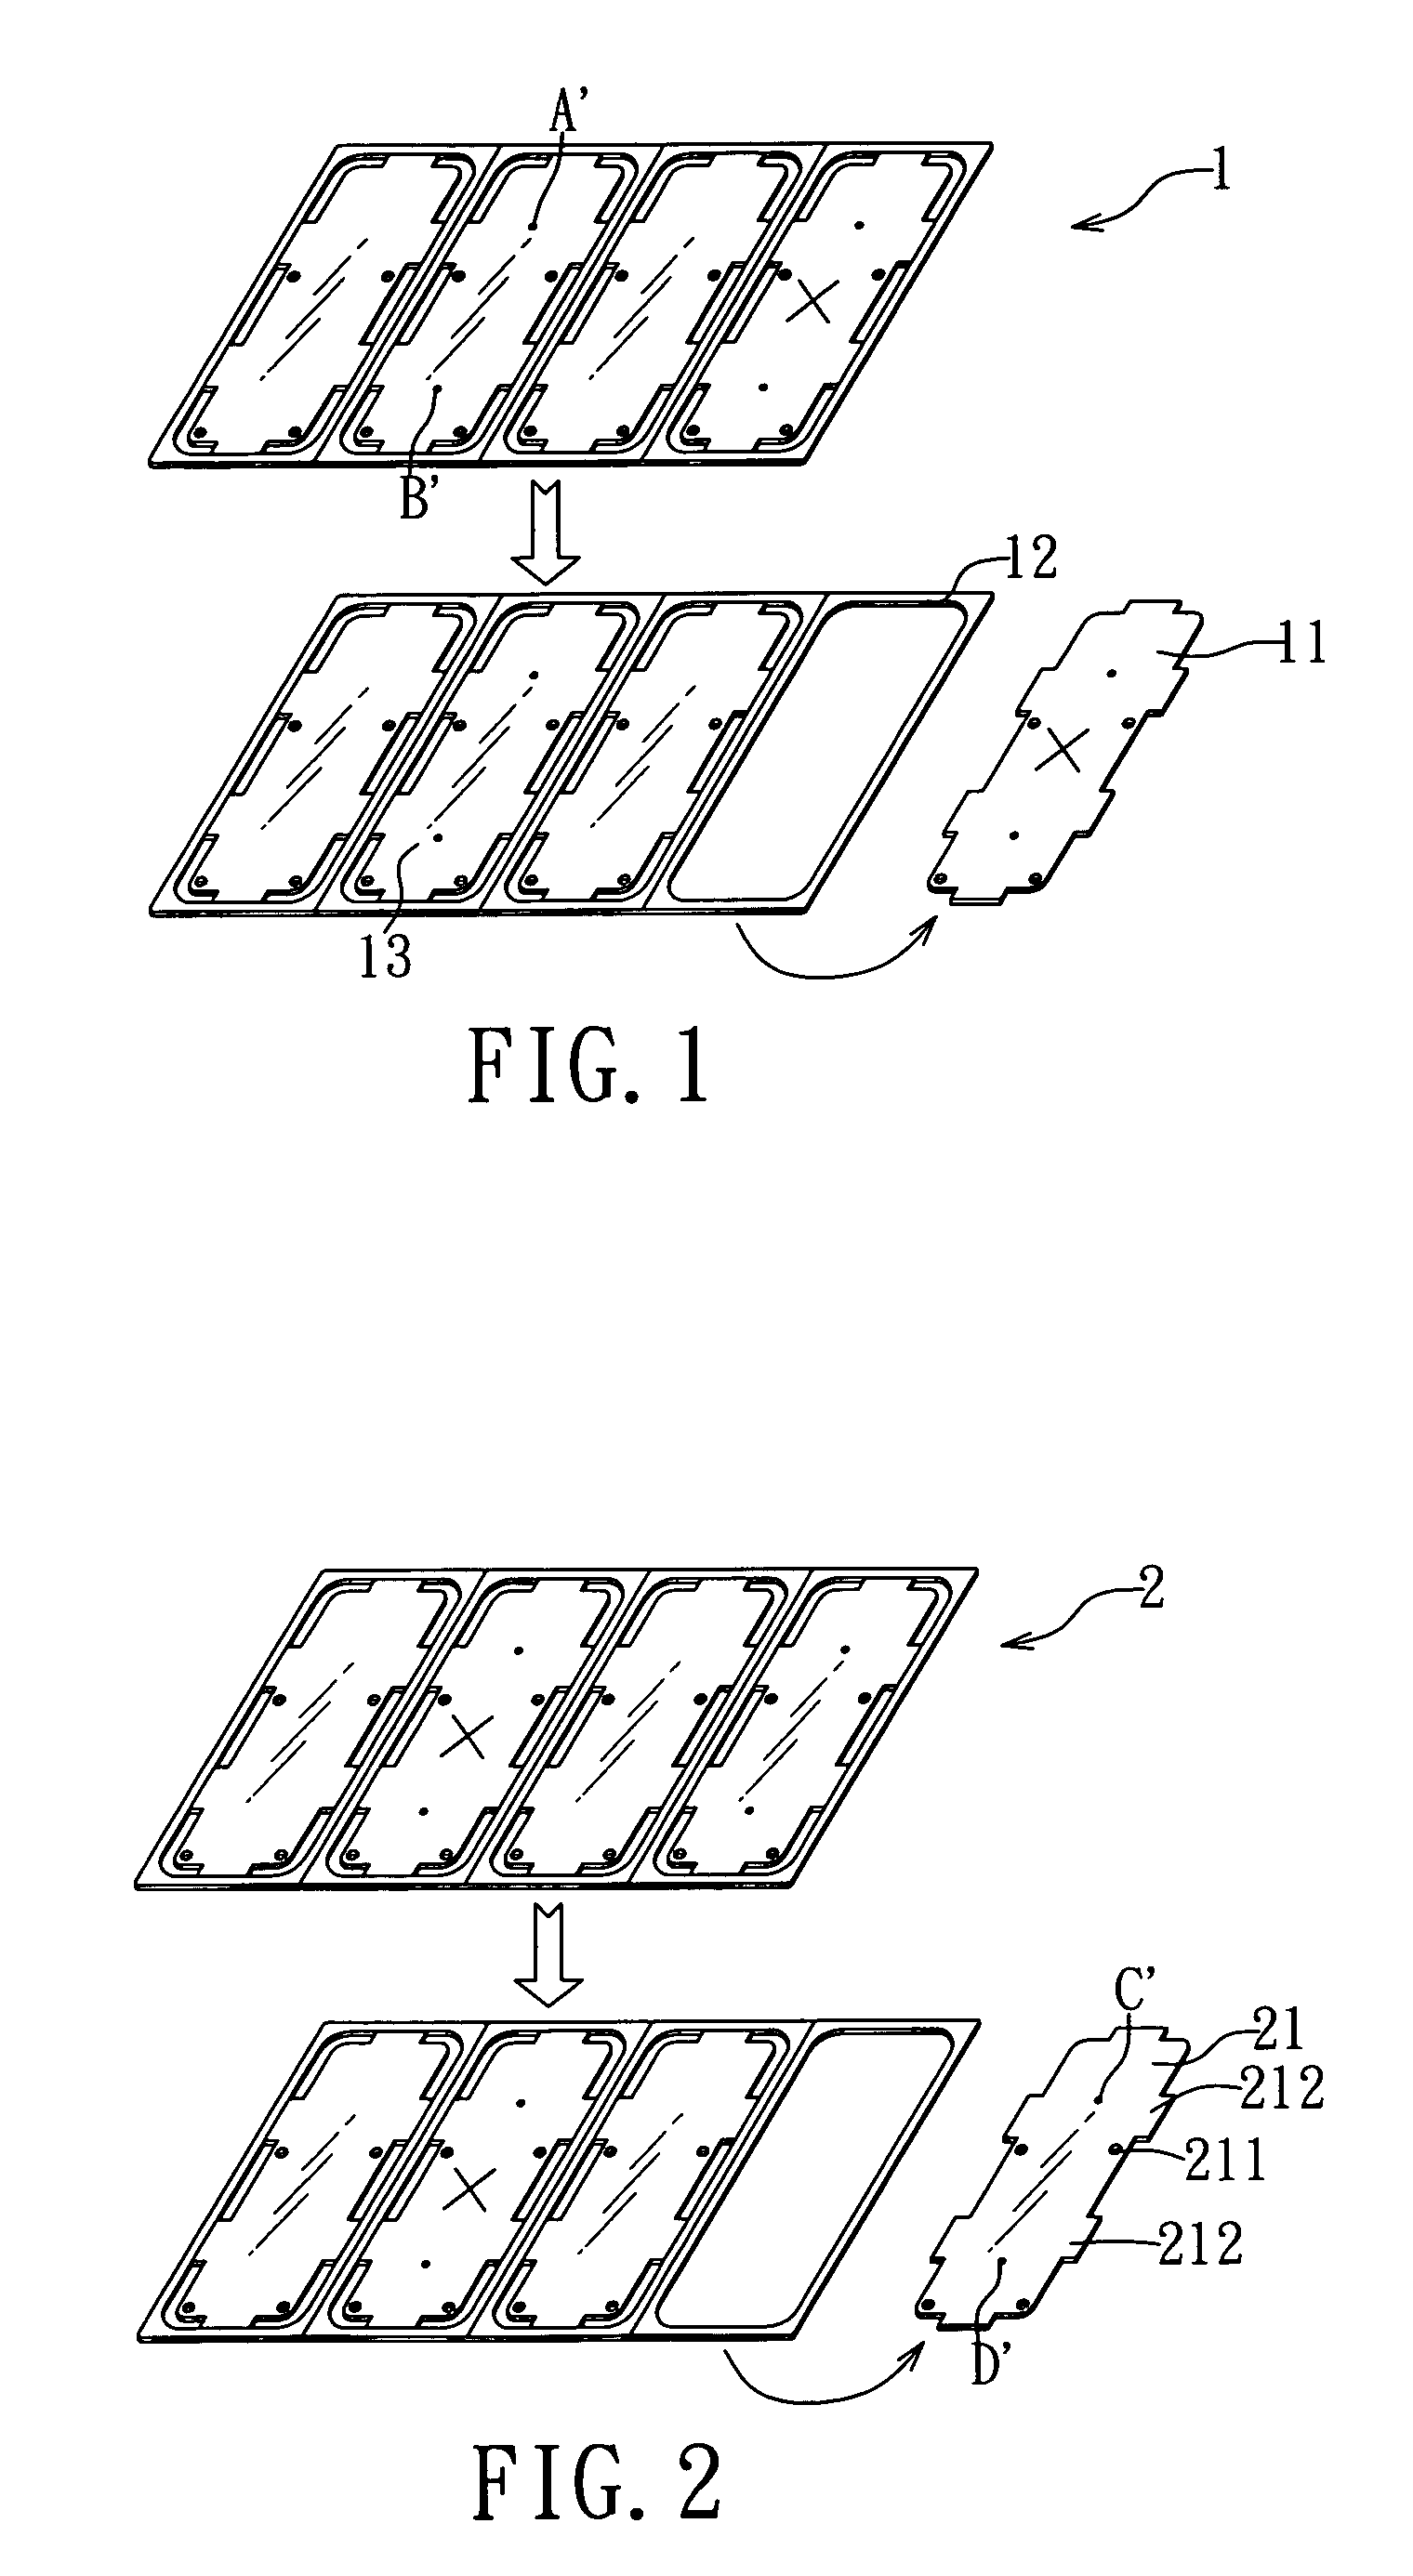 Board placement method and system for defective printed circuit board panel having multiple interconnected printed circuit board units